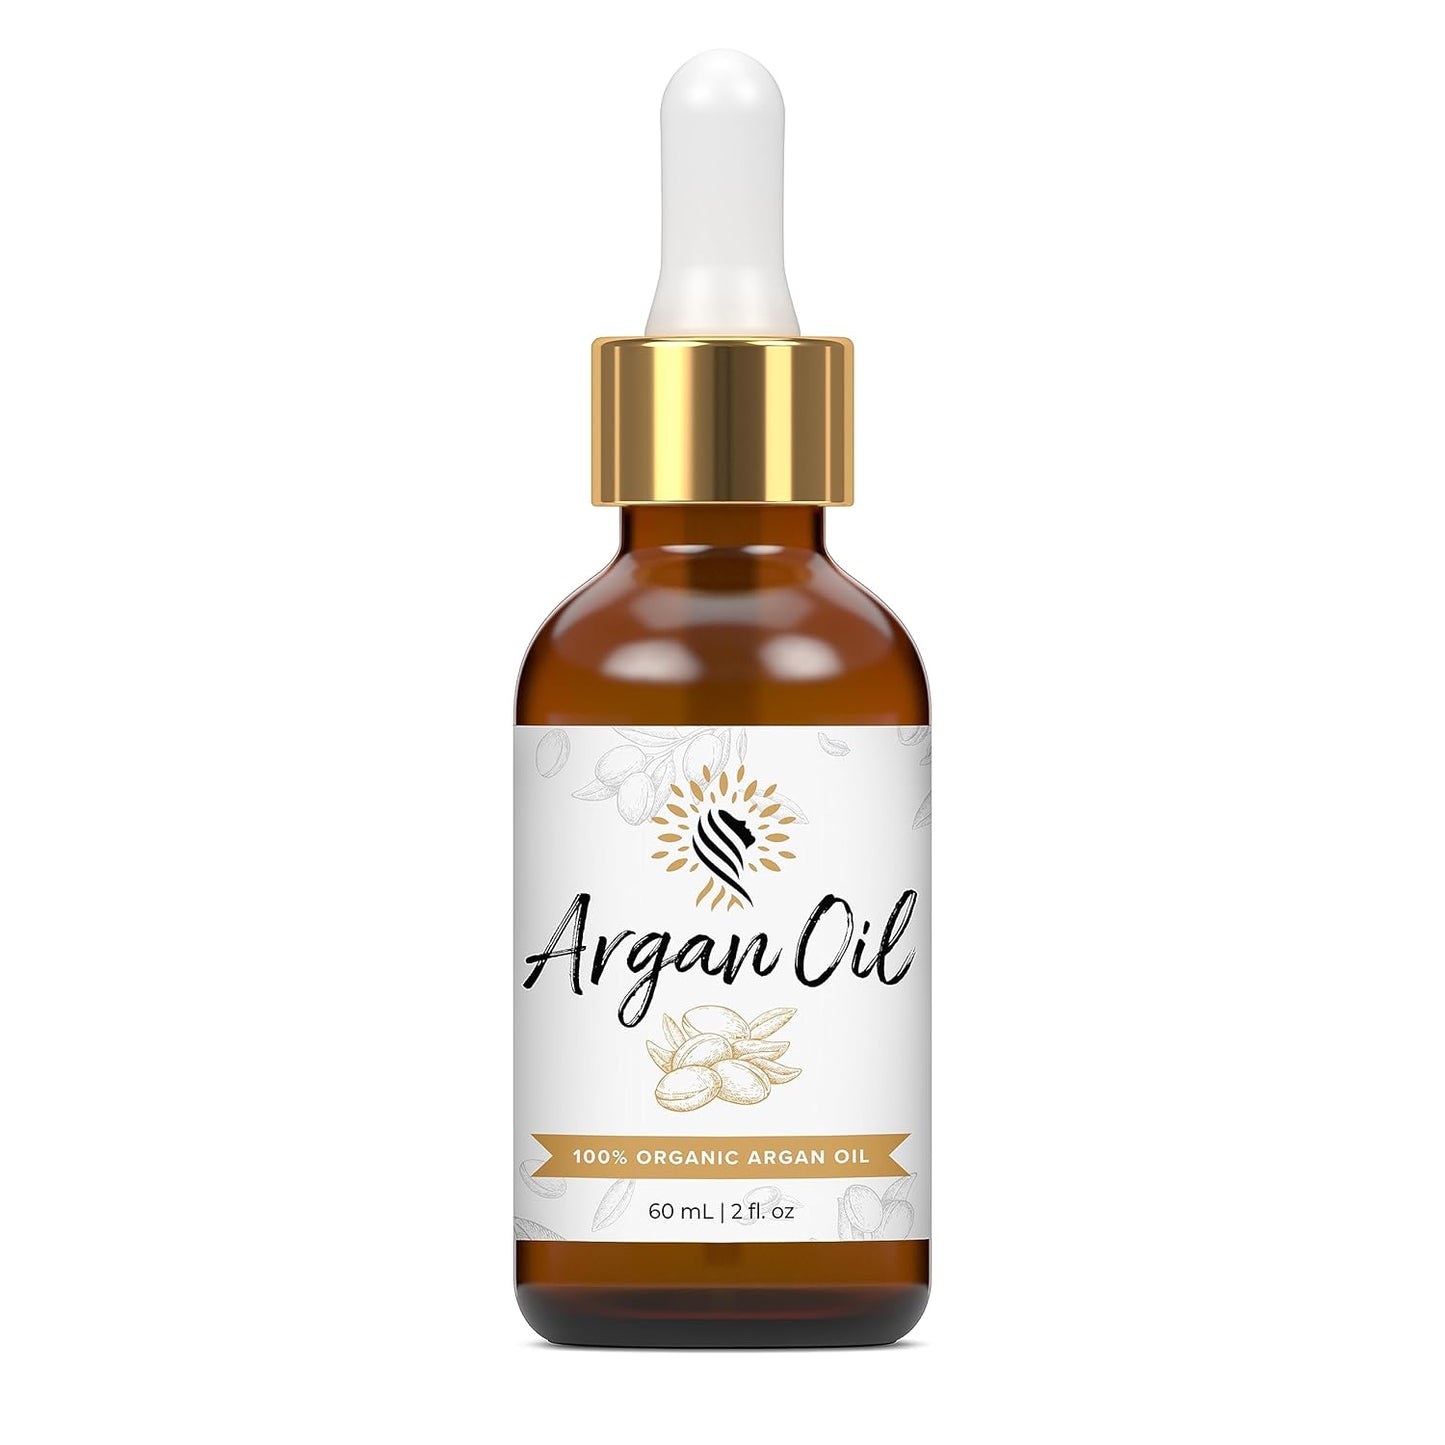 100% Pure Organic Moroccan Argan Oil for Hair, Skin, Nails, Cuticles, Face & Beards - Cold Pressed, Unscented - Filtered through Cotton & Charcoal - All Natural Moisturizer - 2 Fl Oz